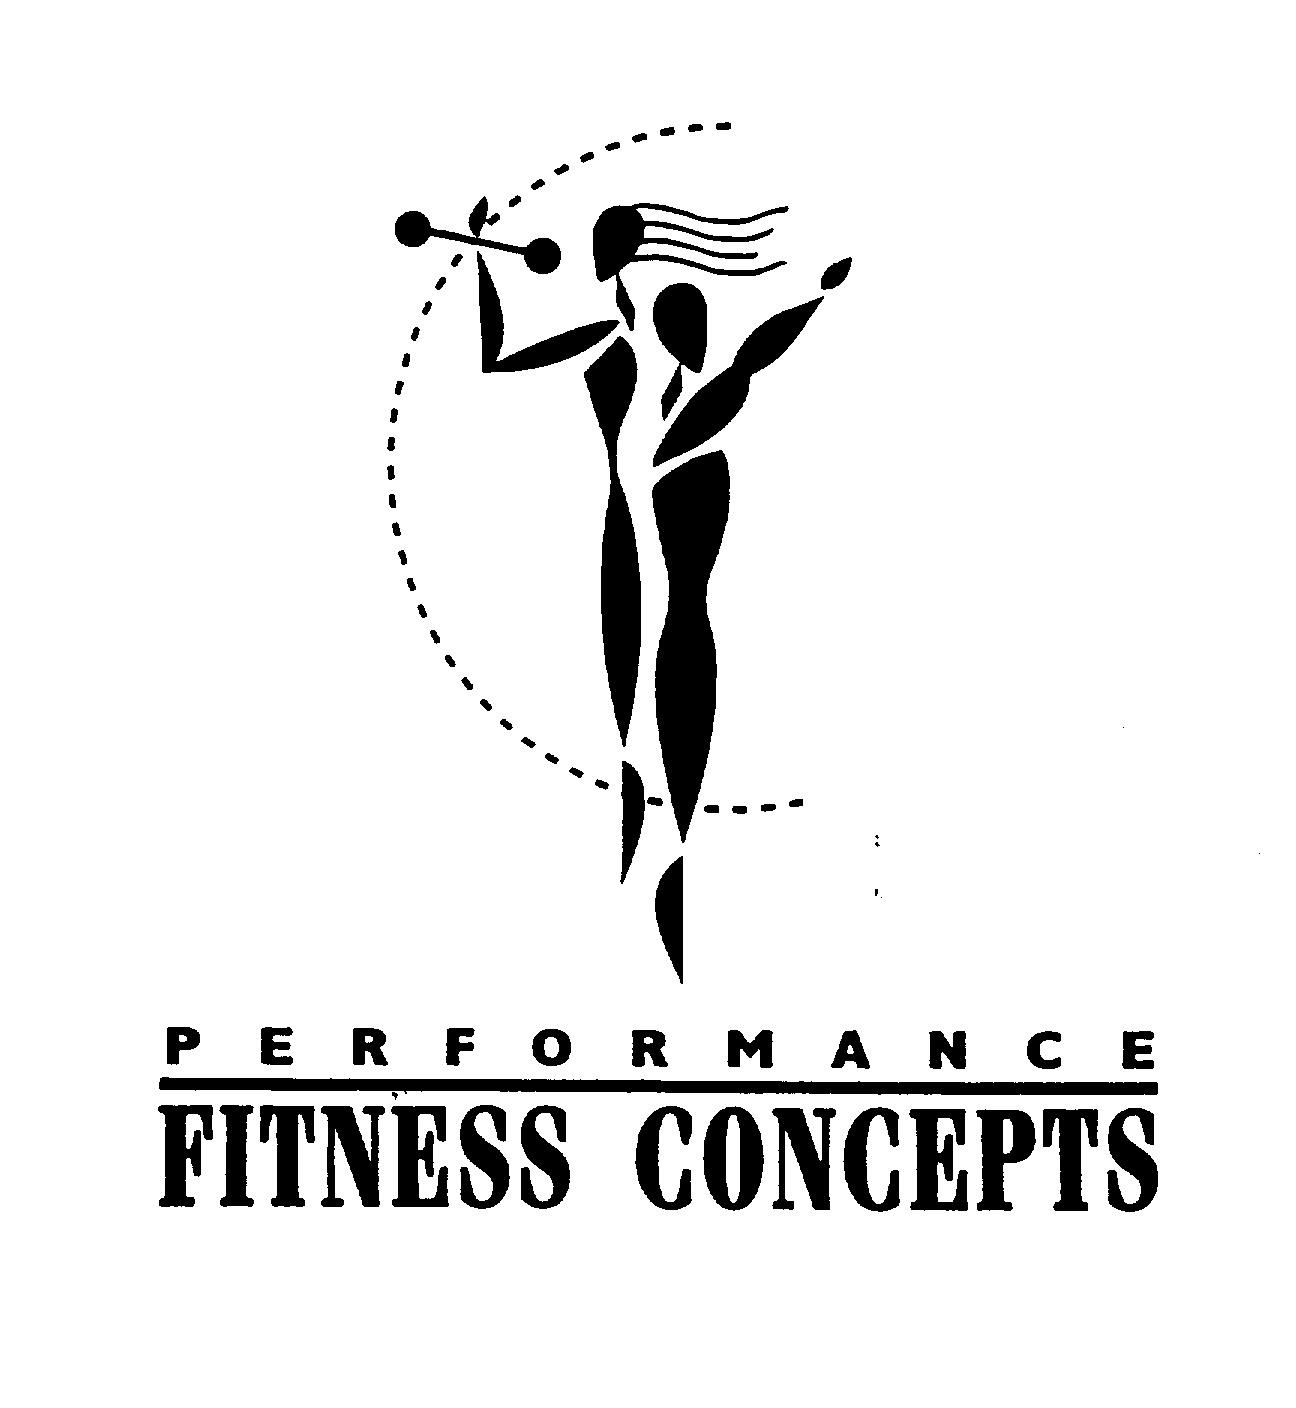  PERFORMANCE FITNESS CONCEPTS